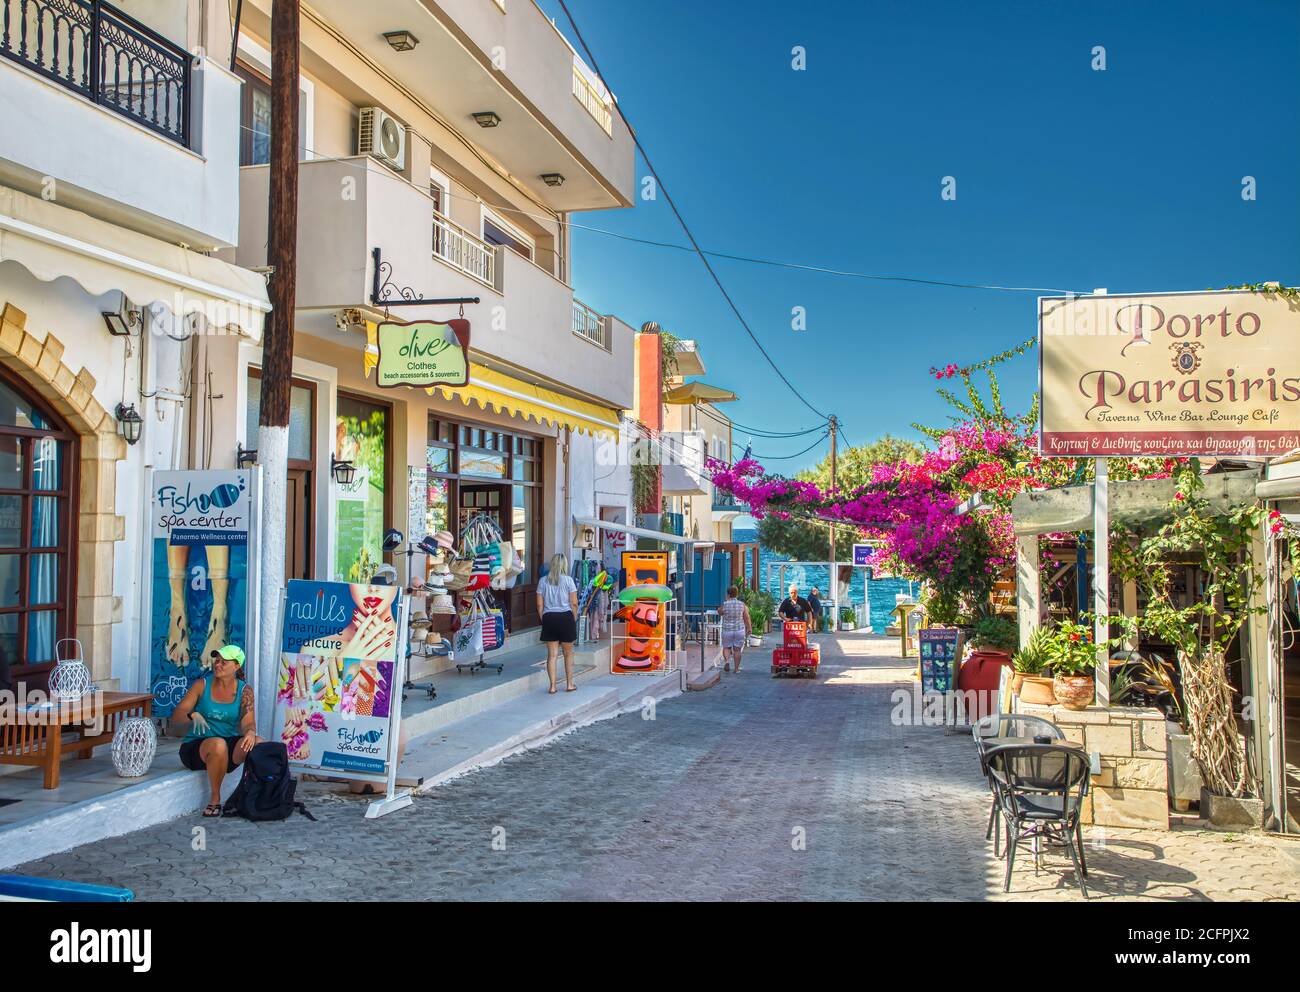 PANORMOS IN RETHYMNO, GREECE - AUGUST 7: (EDITORS NOTE: Image is a digital [High Dynamic Range, HDR] composite.) Streets and stores are nearly empty because of the economic crisis and pandemic on August 7, 2020 in Panormos in Rethymno, Greece. Stock Photo